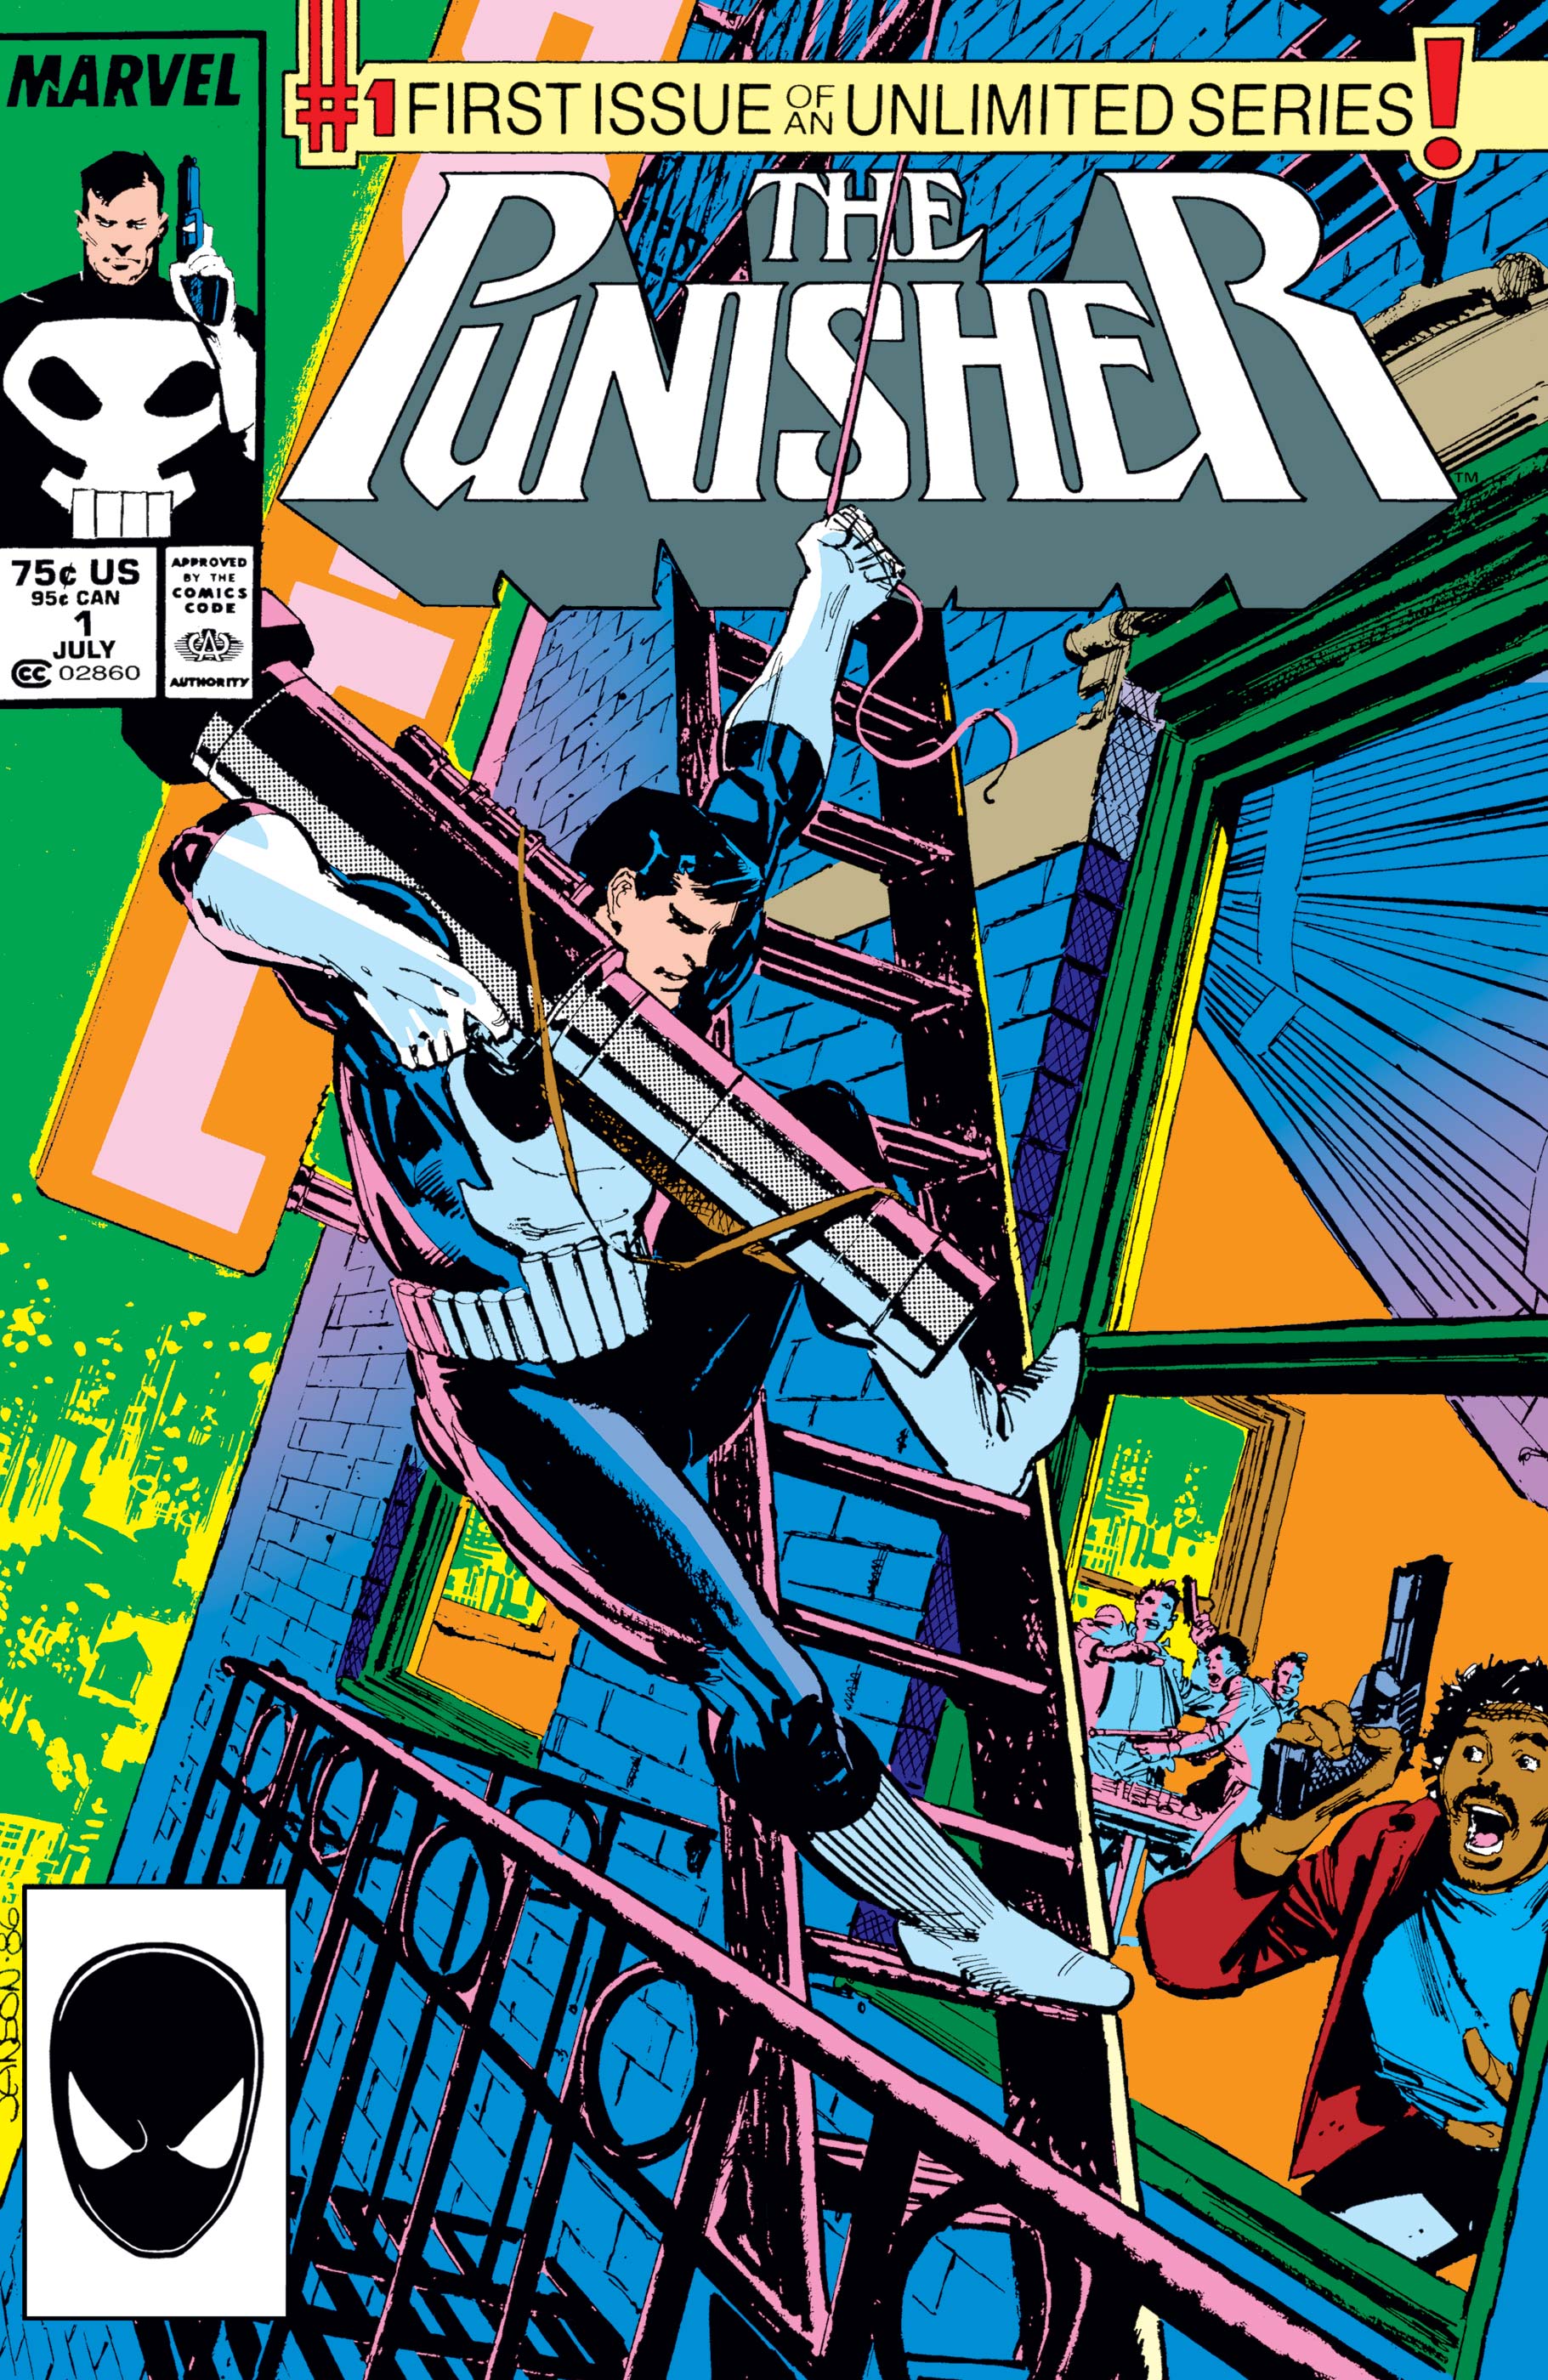 The Punisher (1987) #1